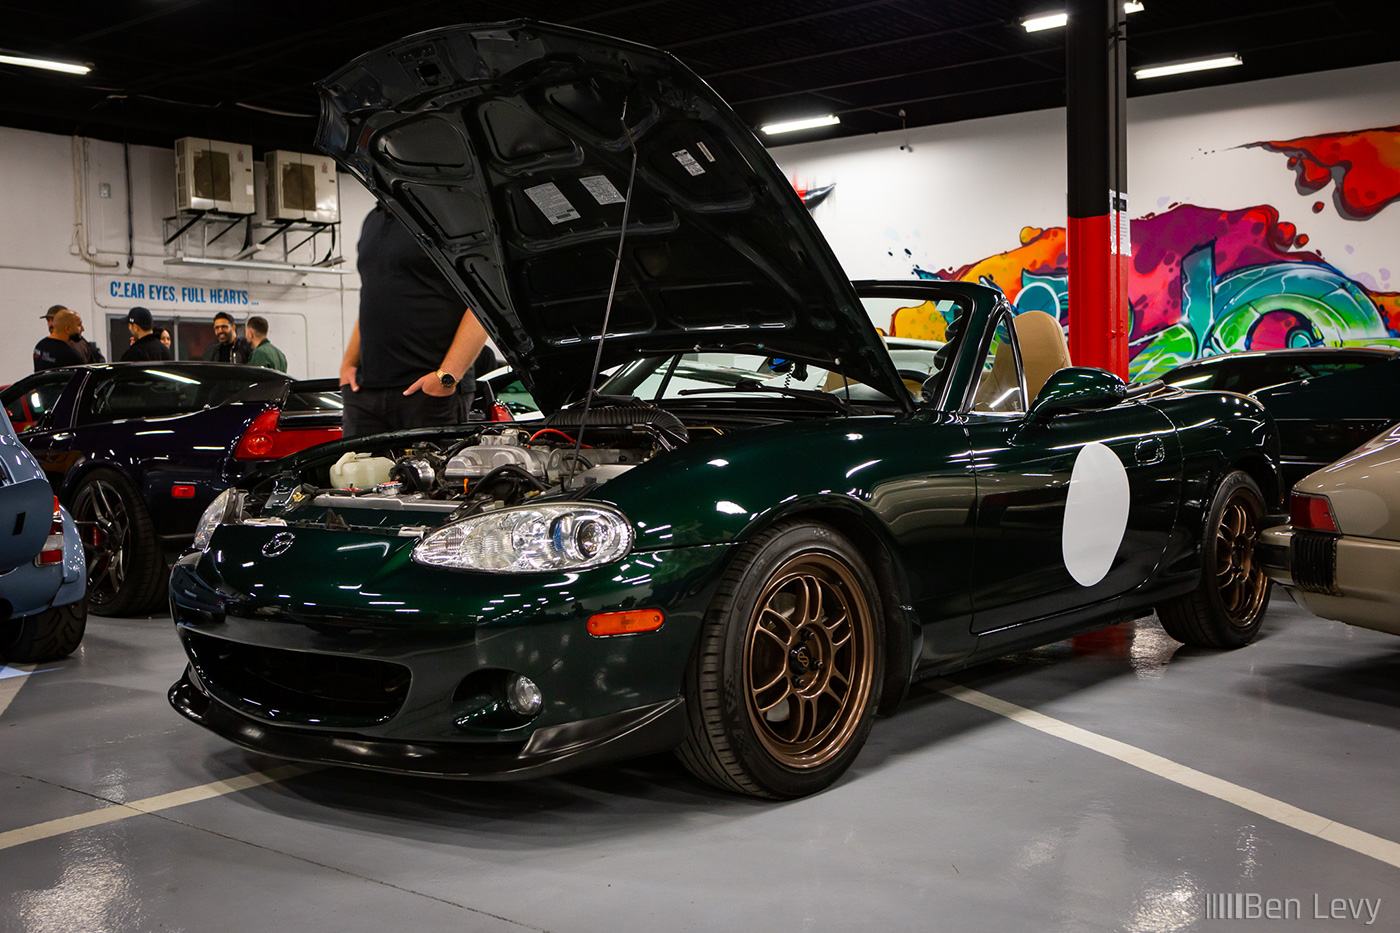 Supercharged Mazda Miata at Lowend Takeover